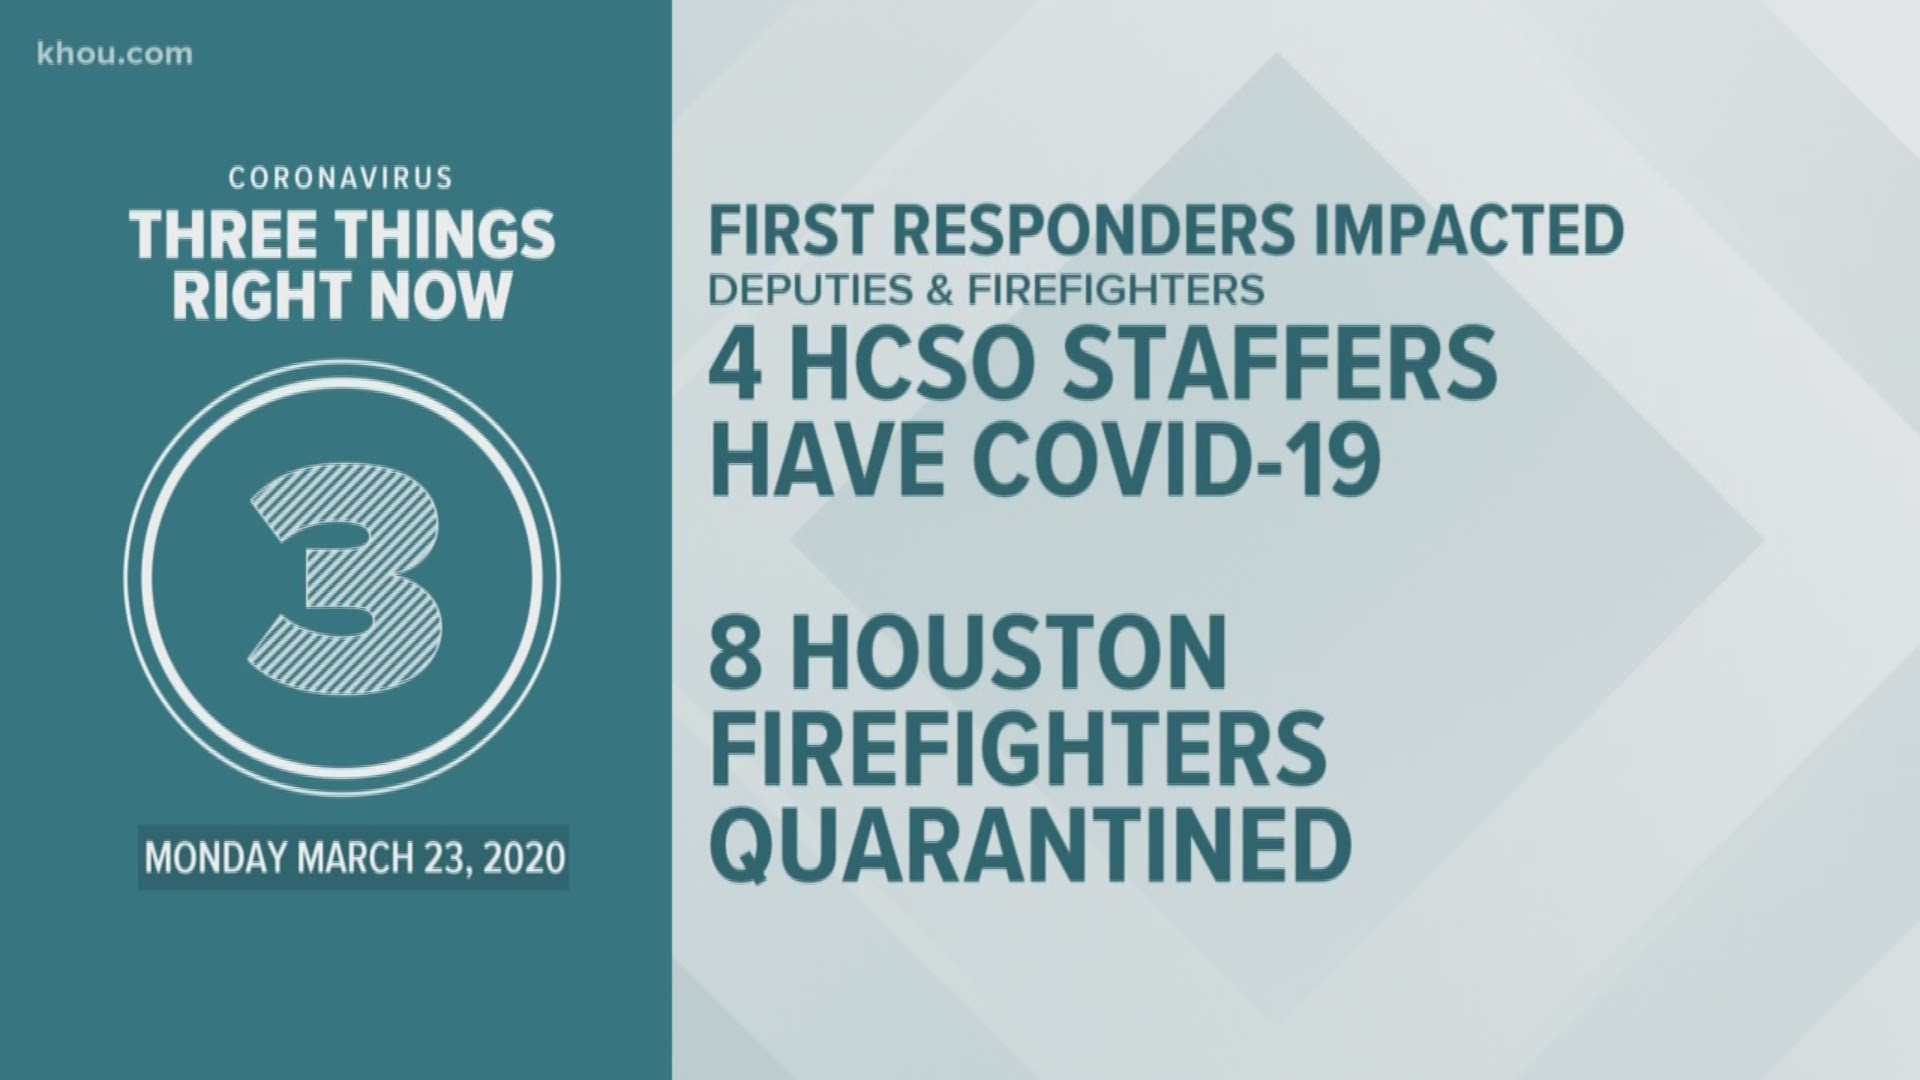 #HTownRush has the latest updates on the COVID-19 outbreak.